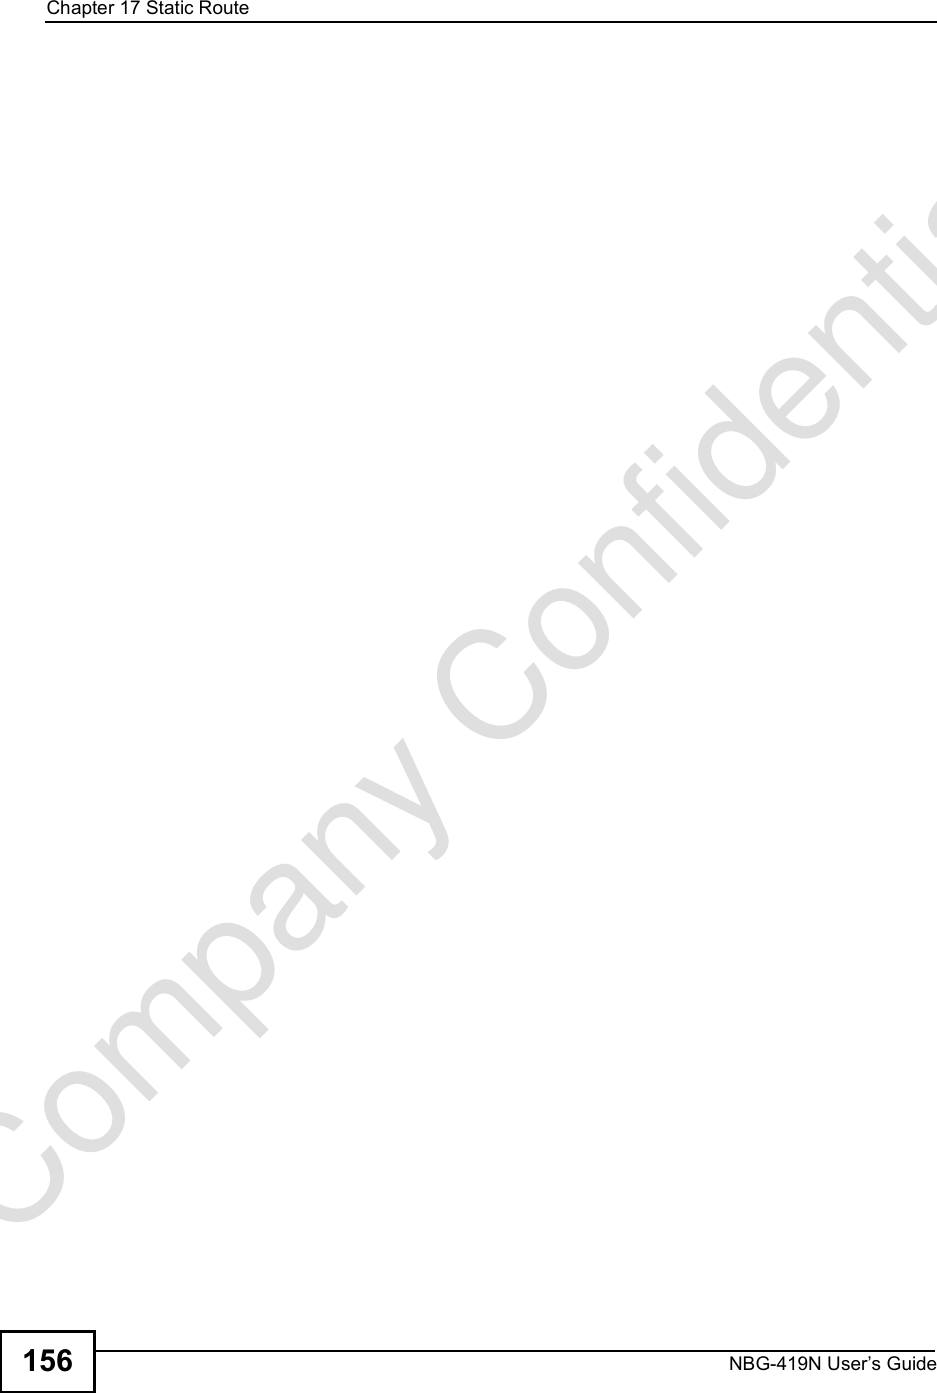 Chapter 17Static RouteNBG-419N User s Guide156Company Confidential